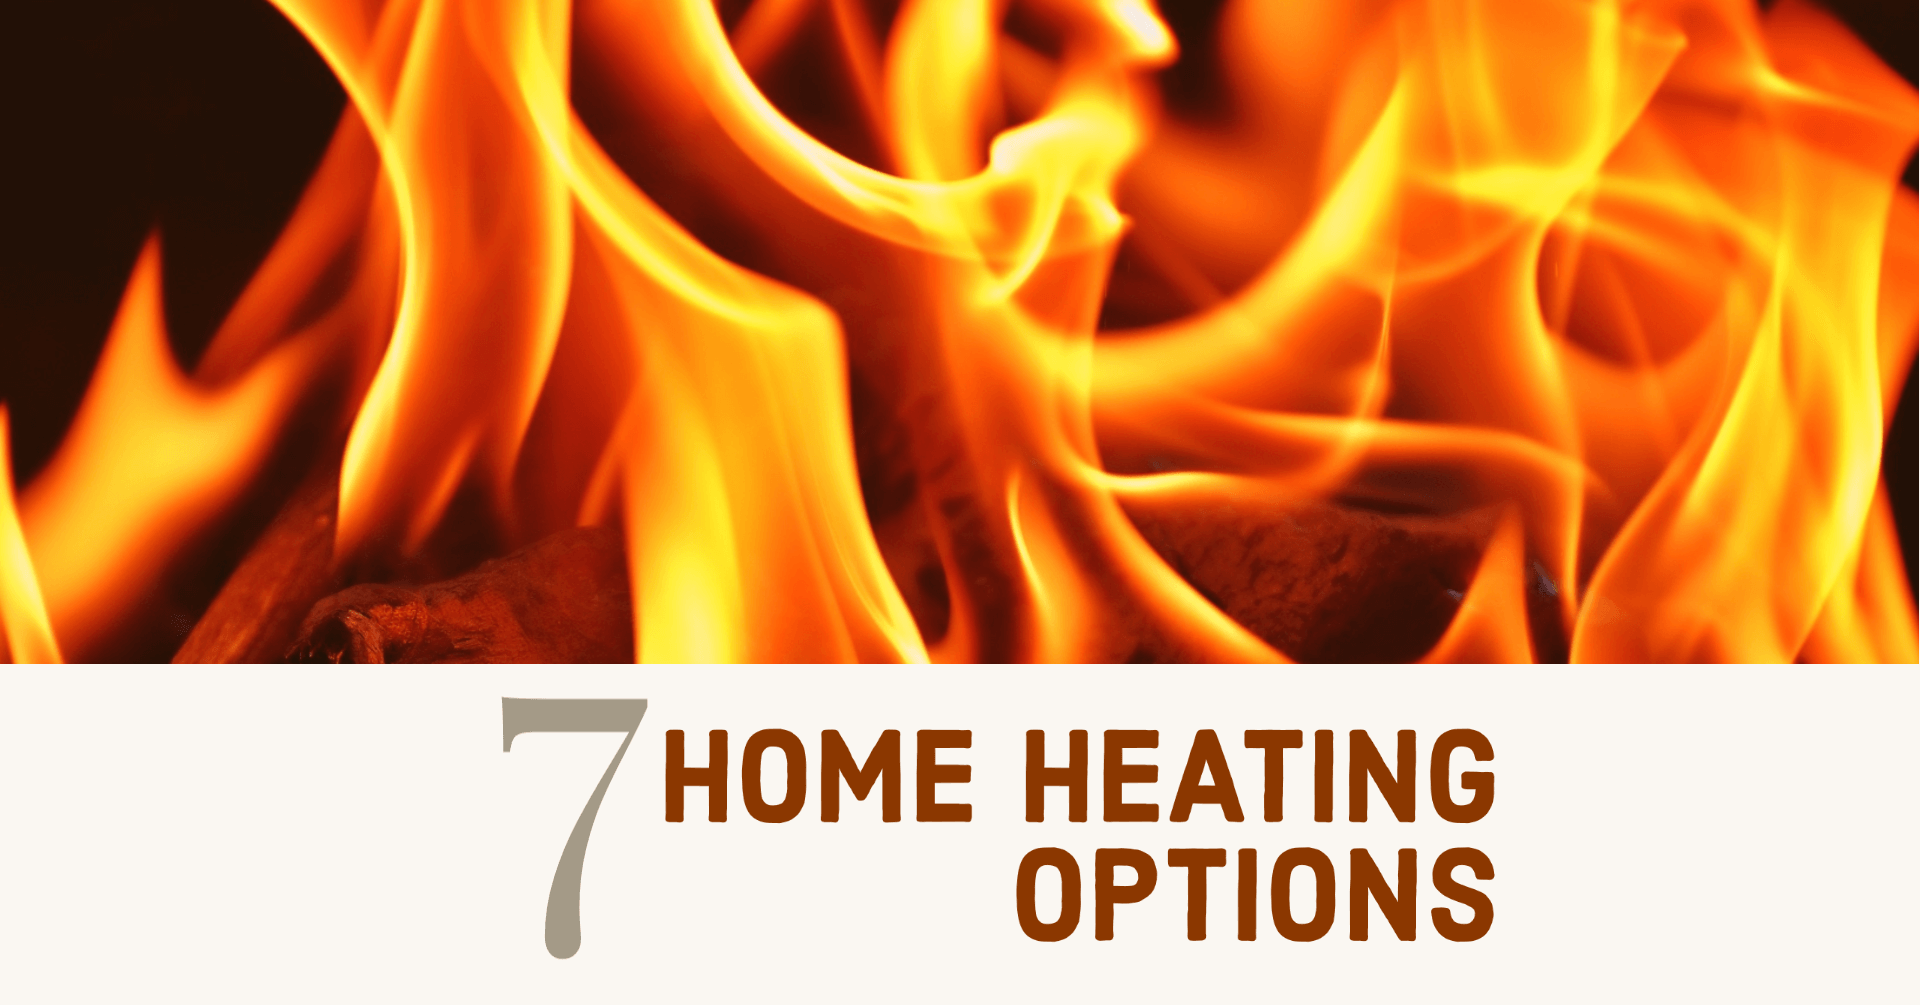 7 Home Heating Options